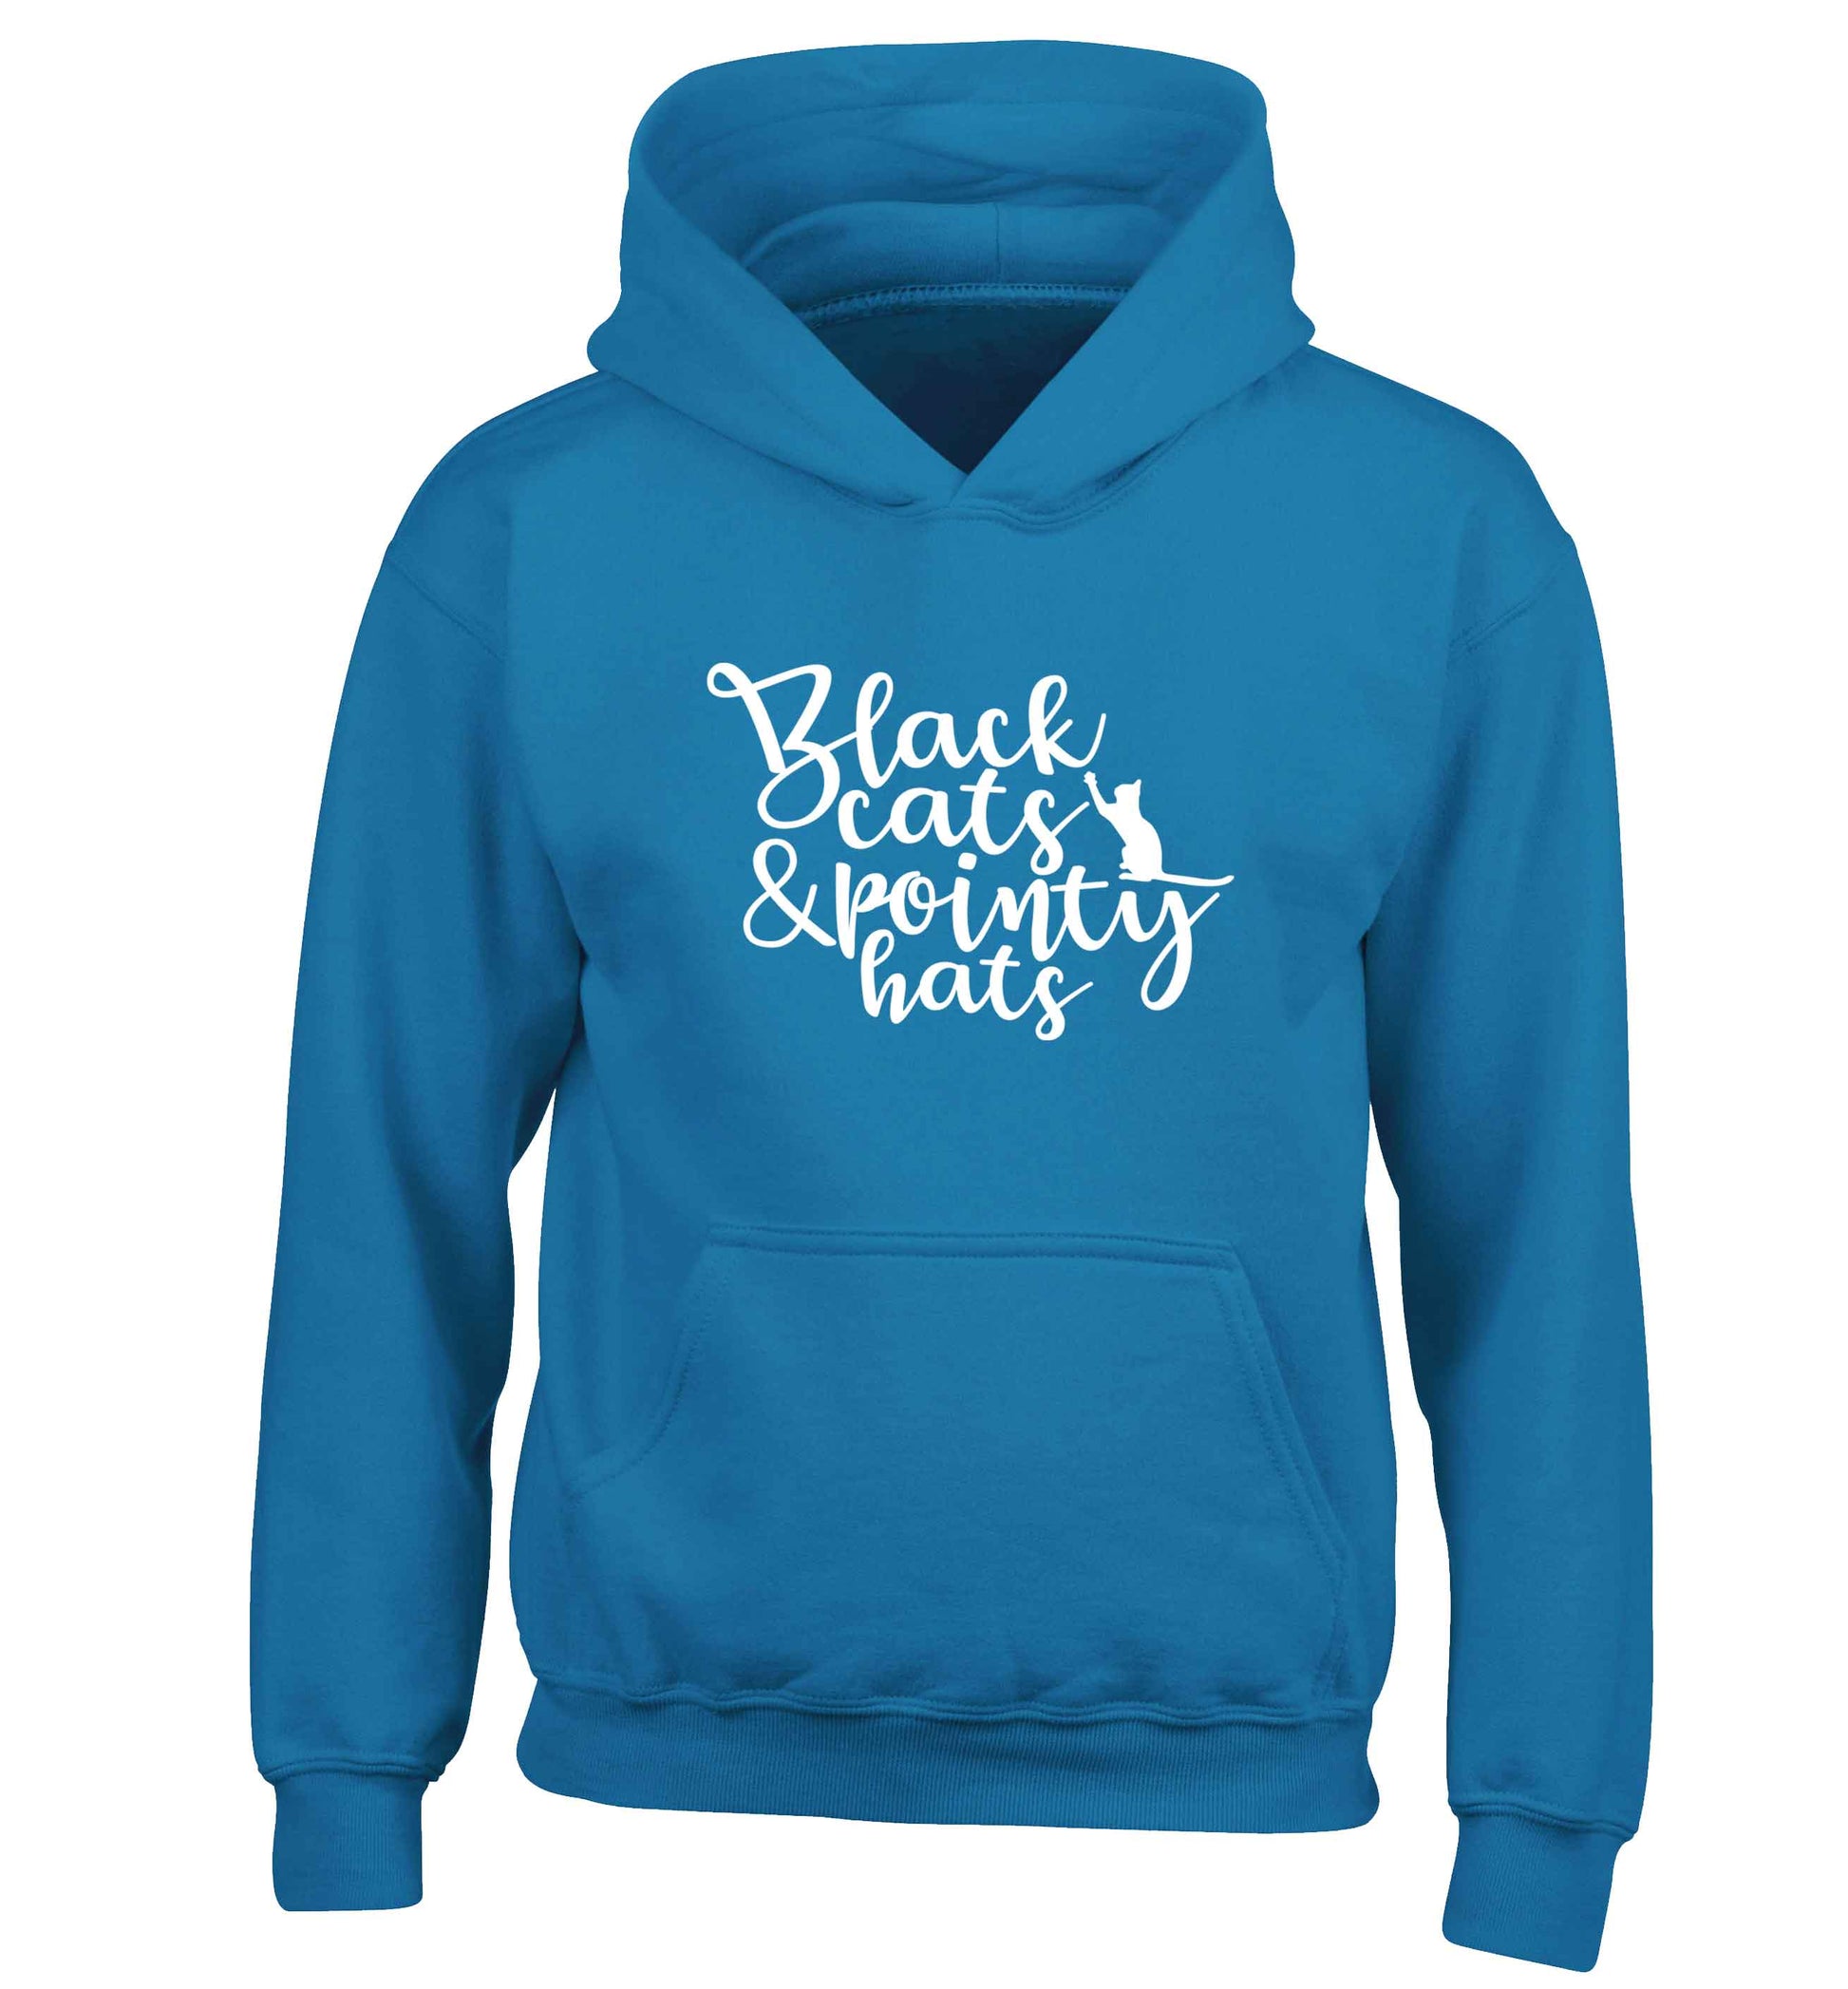 Black cats and pointy hats children's blue hoodie 12-13 Years